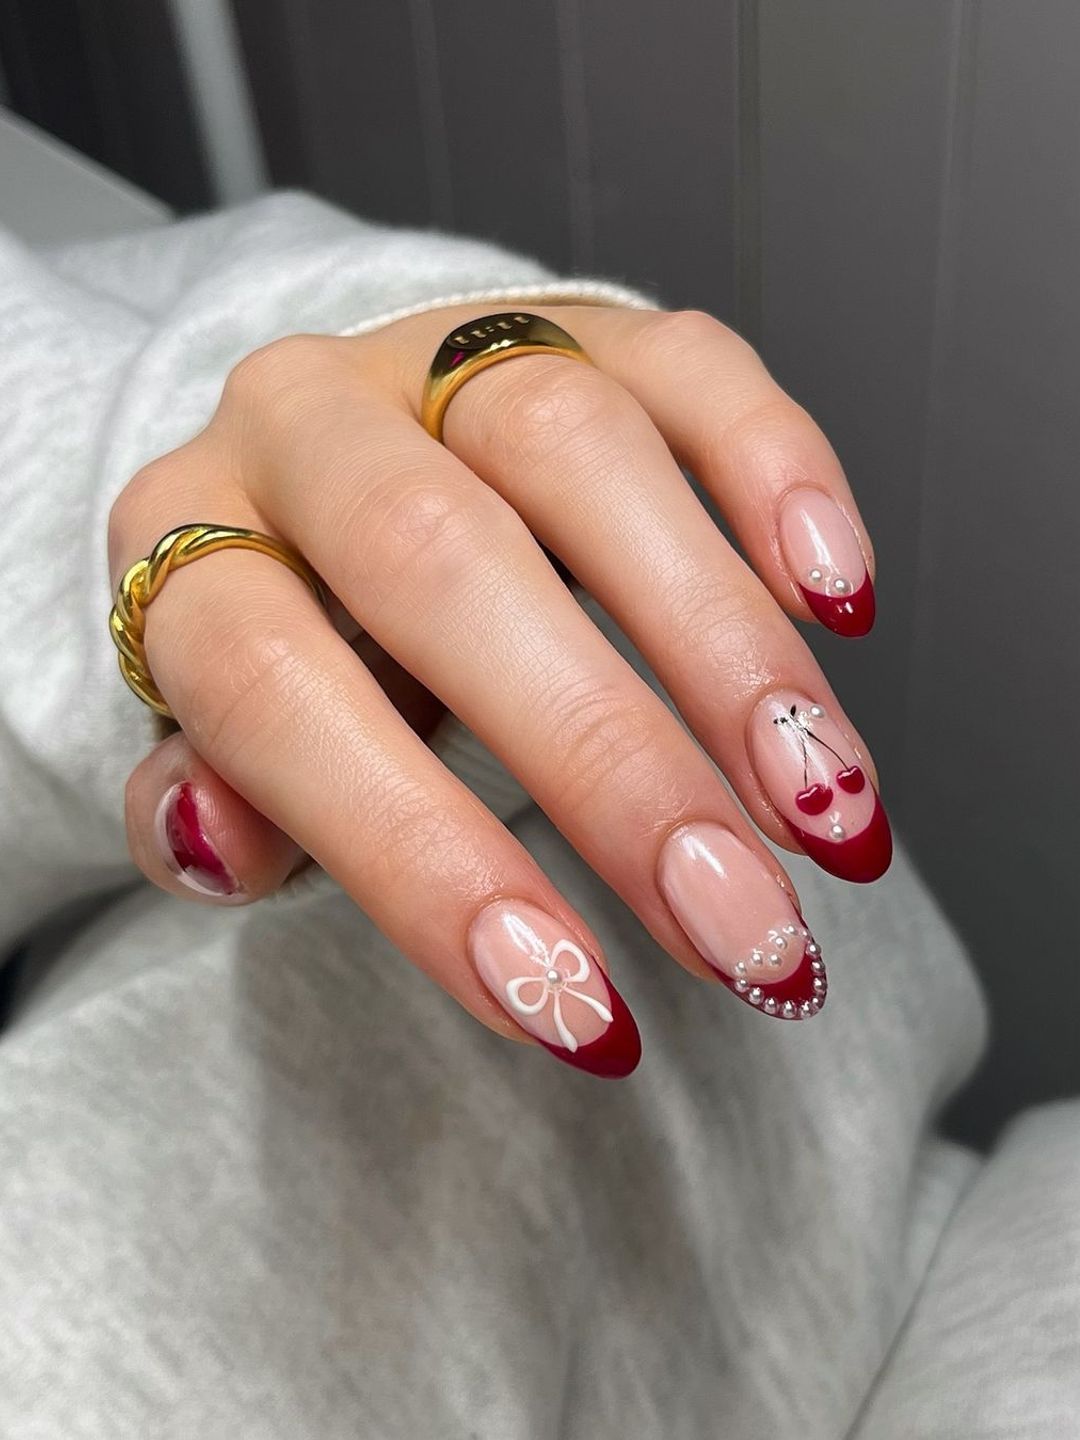 Nails with bows, cherries and hearts 